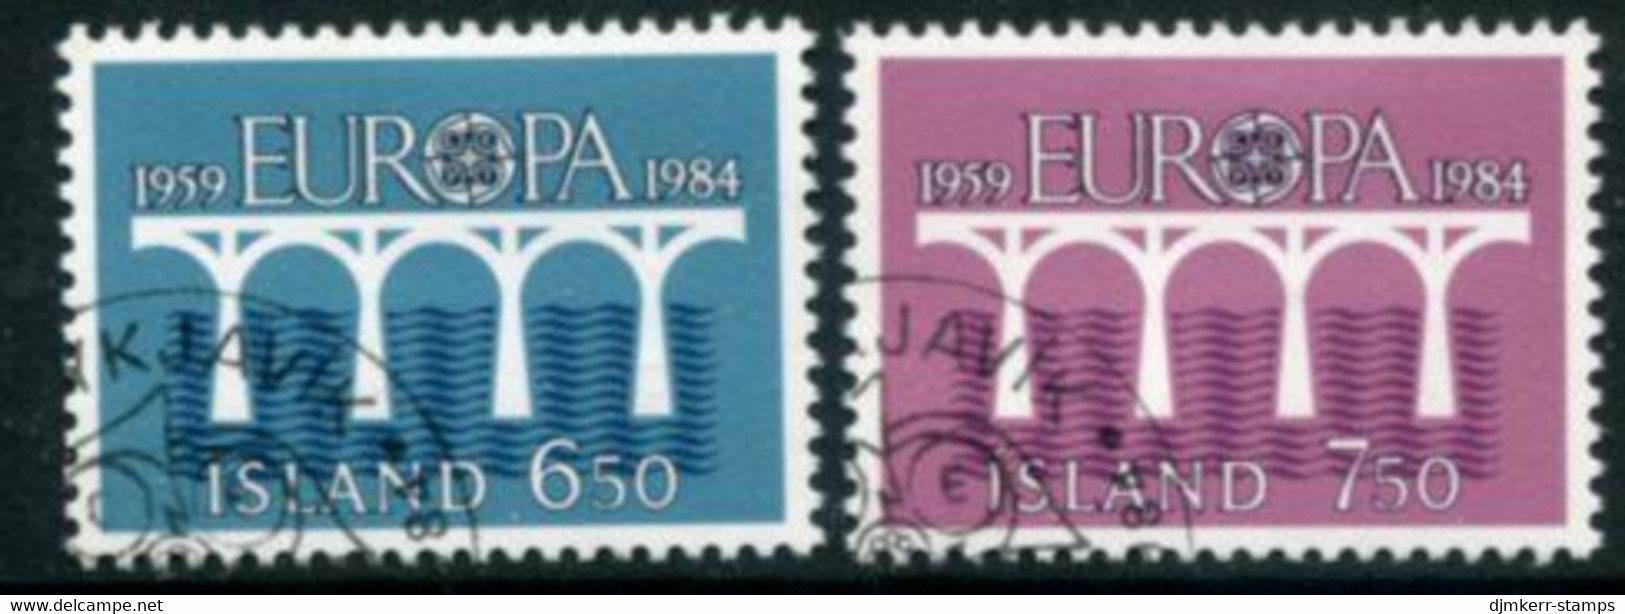 ICELAND 1984  Europa Used.  Michel 614-15 - Usados